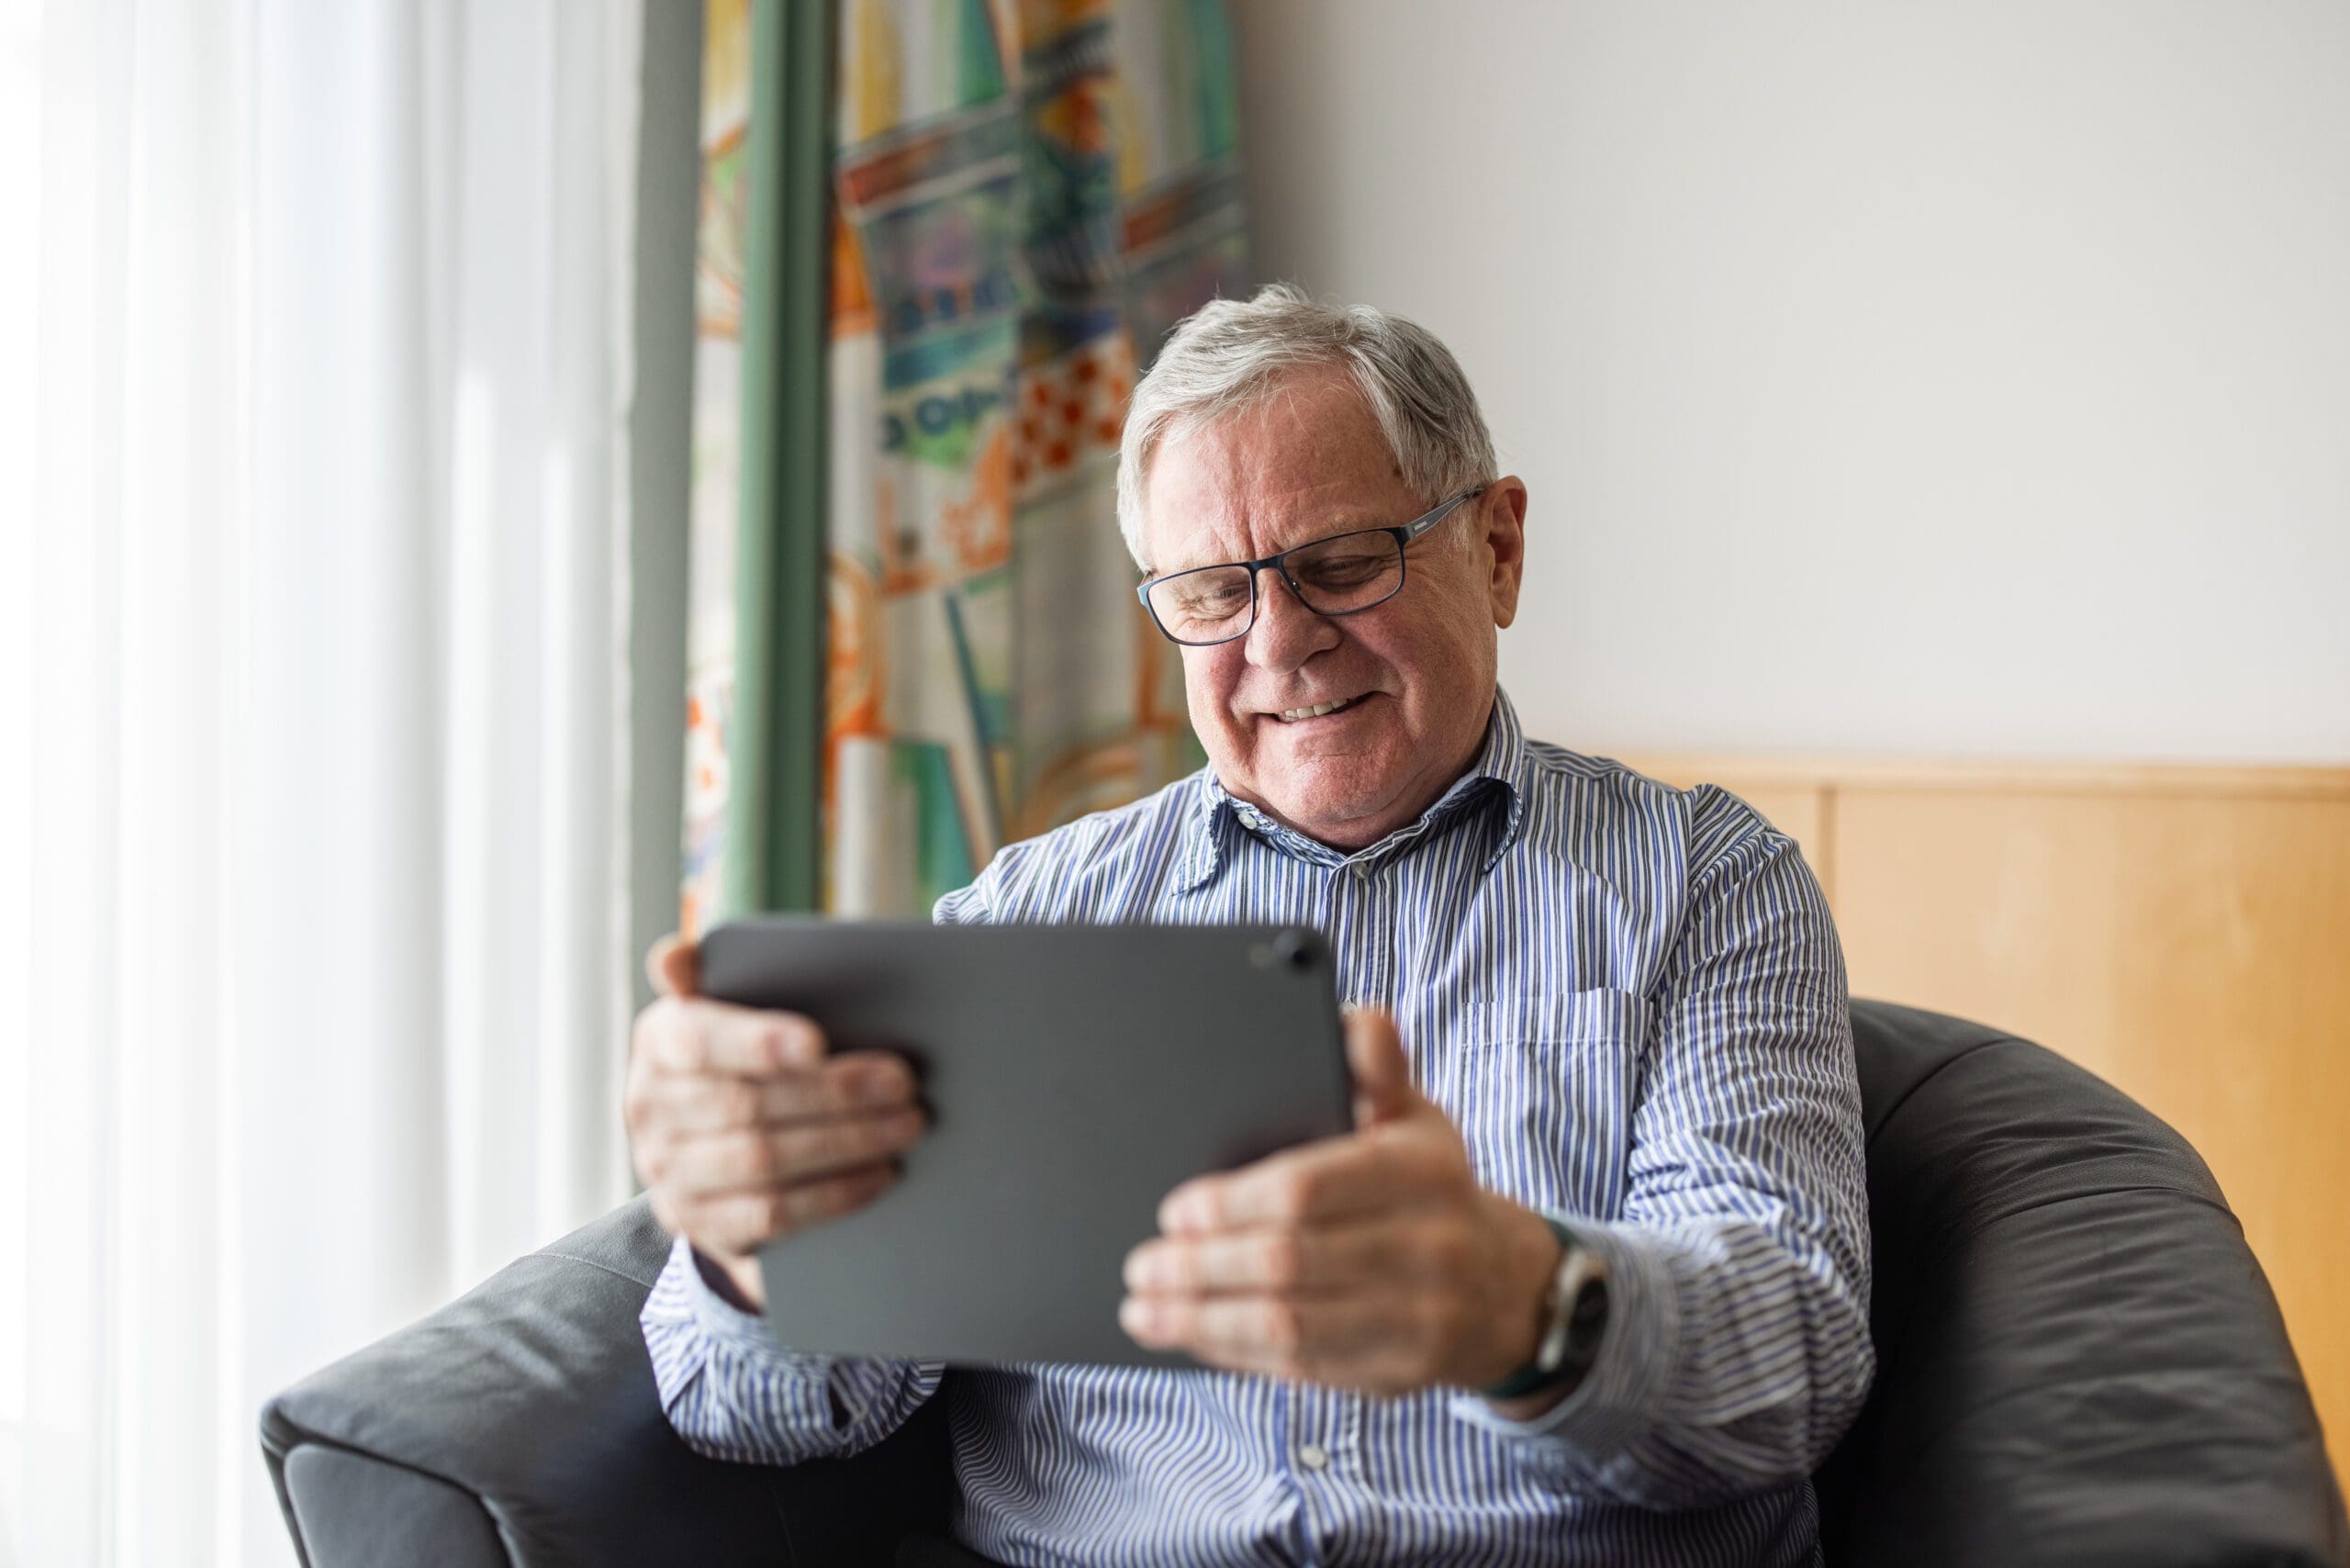 Photograph of an elderly person using a tablet in a digital inclusion programme for EMPOWERCARE